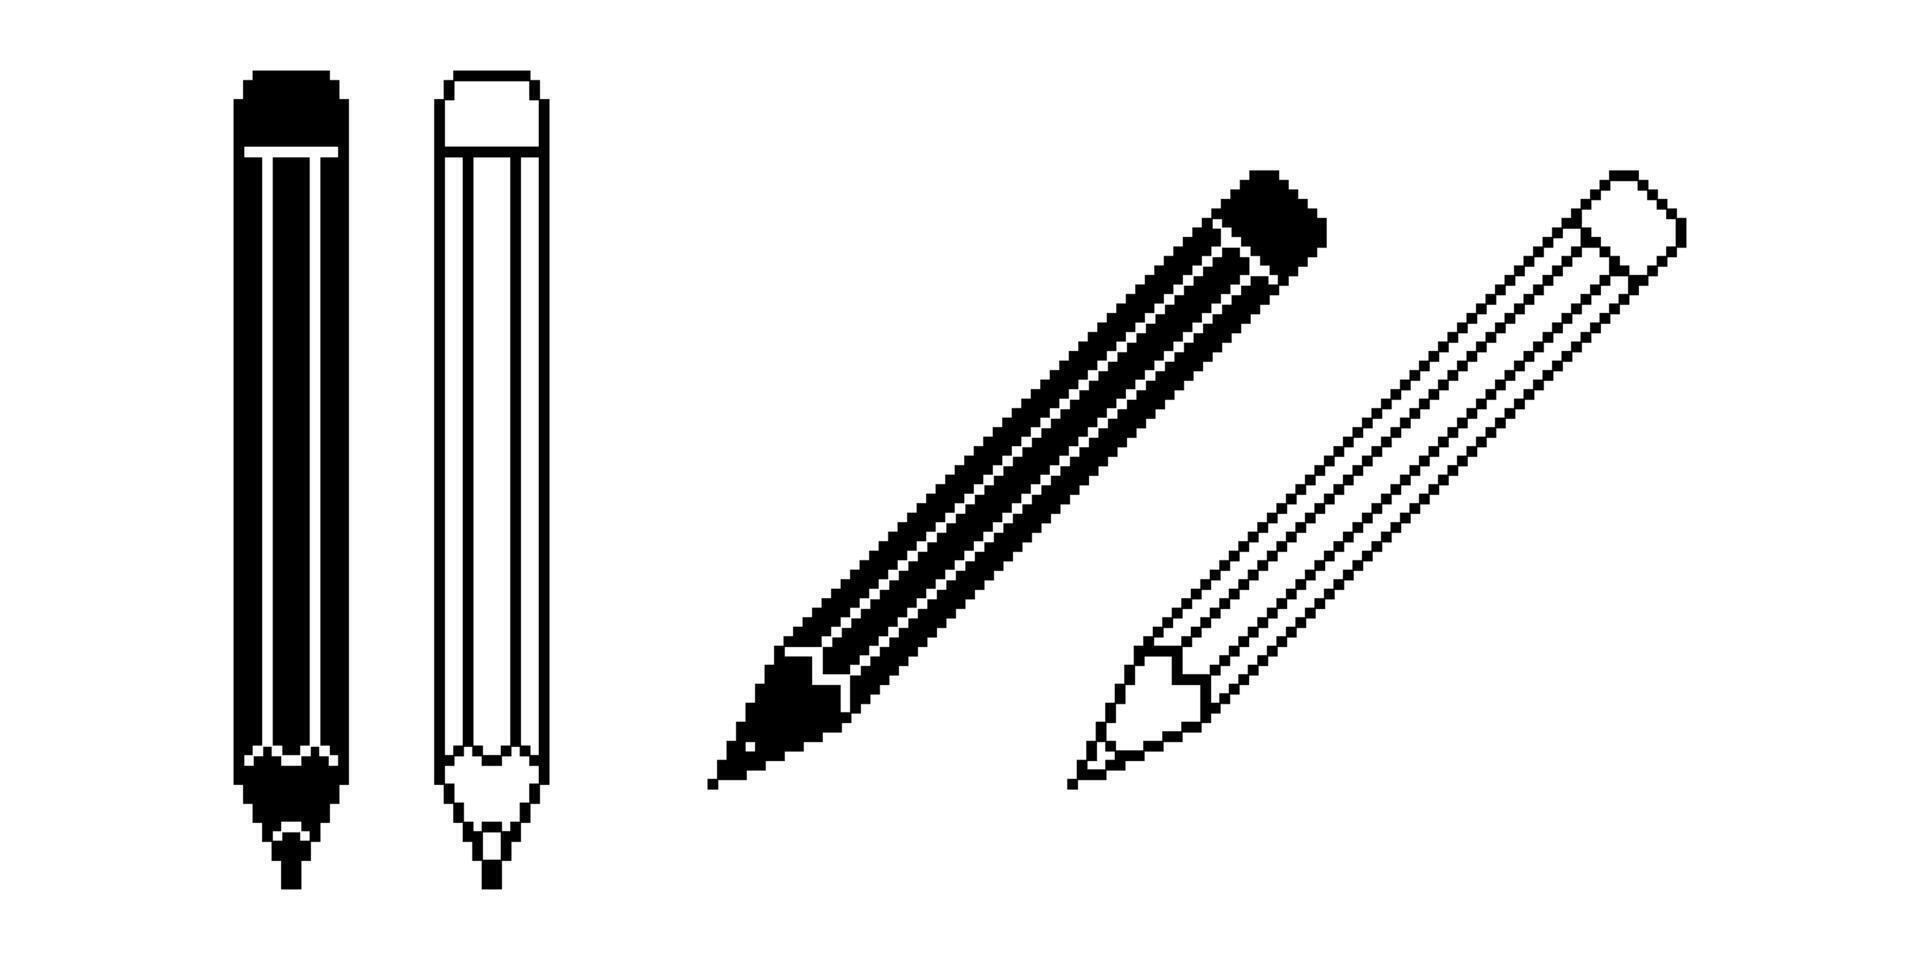 pixel art pencil icon set isolated on white background vector